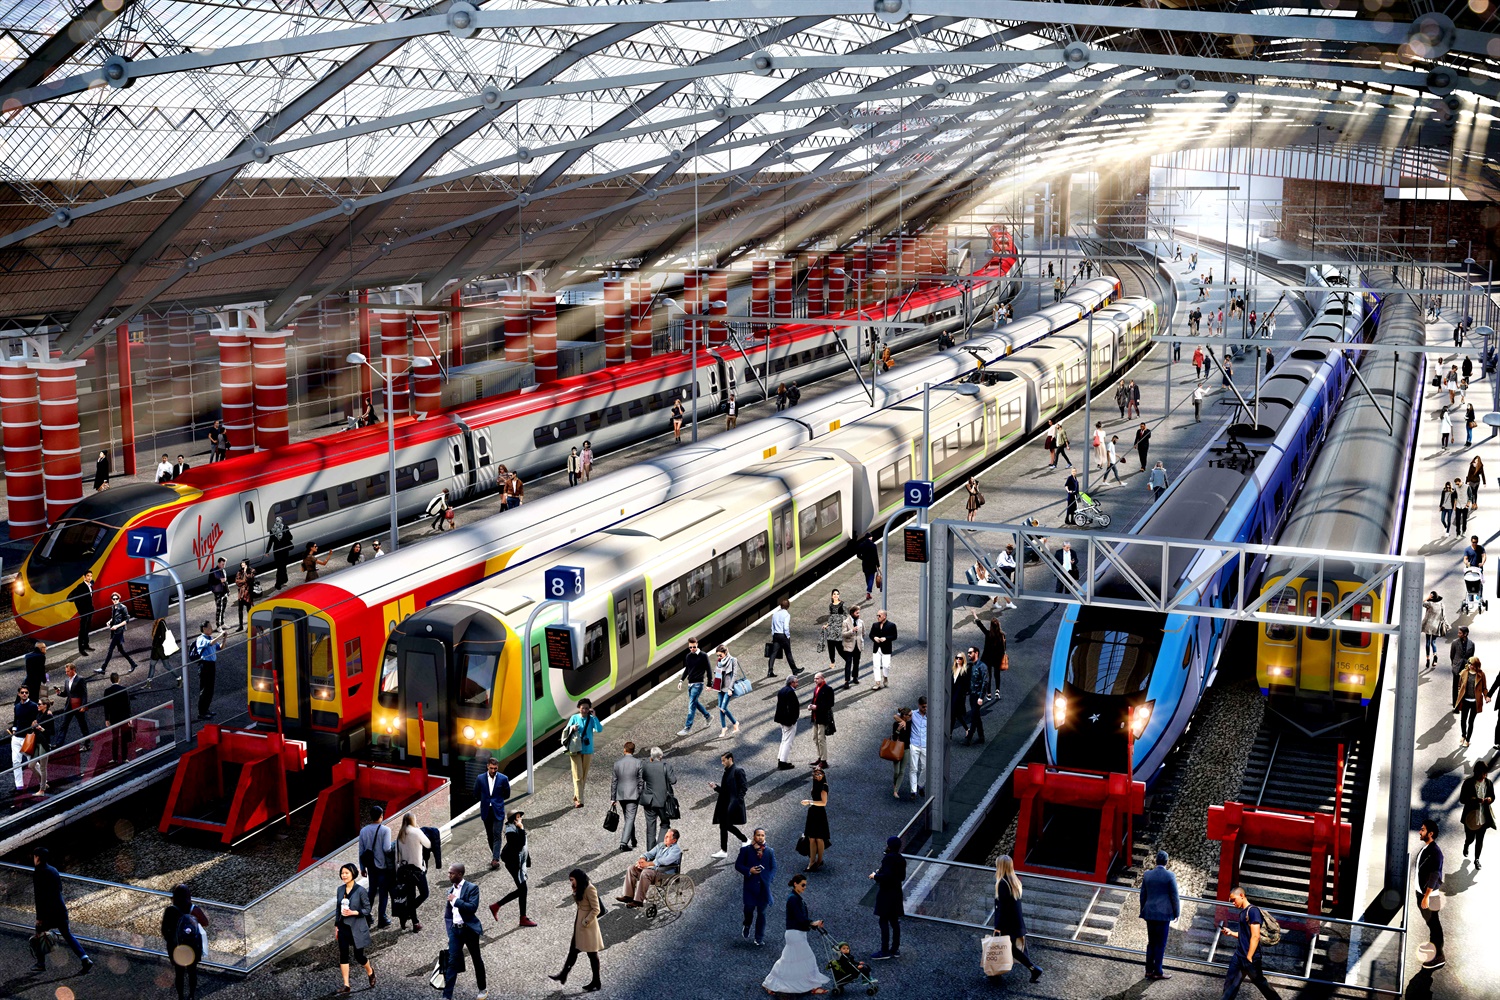 The first phase of Liverpool Lime Street's major upgrade